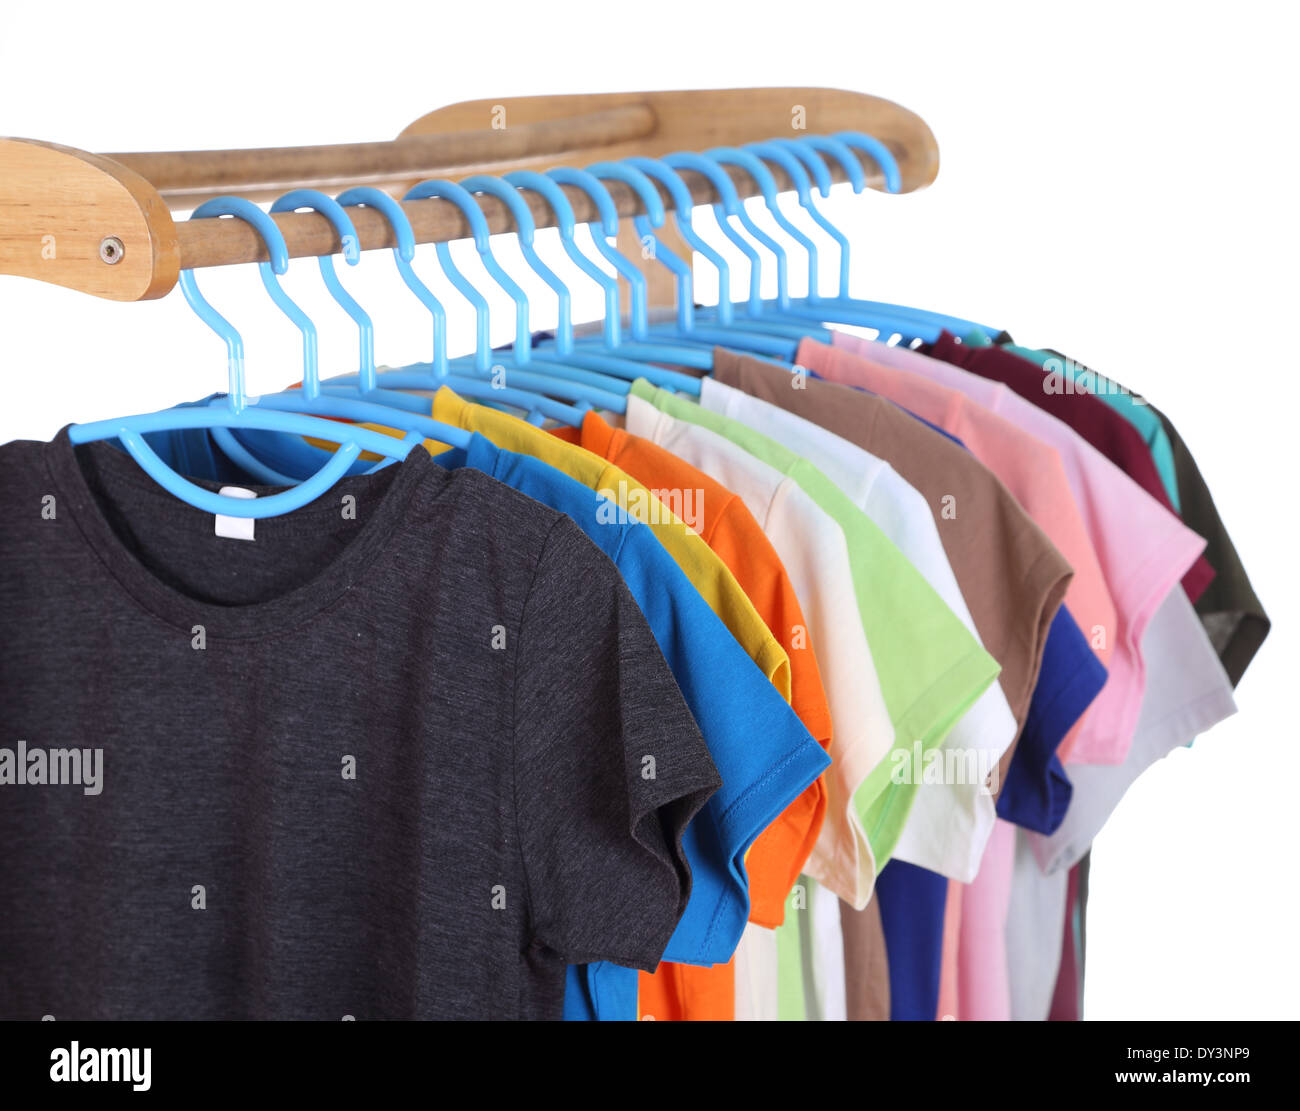 Row T Shirts Hanging On Hangers Stock Photos & Row T Shirts Hanging On ...